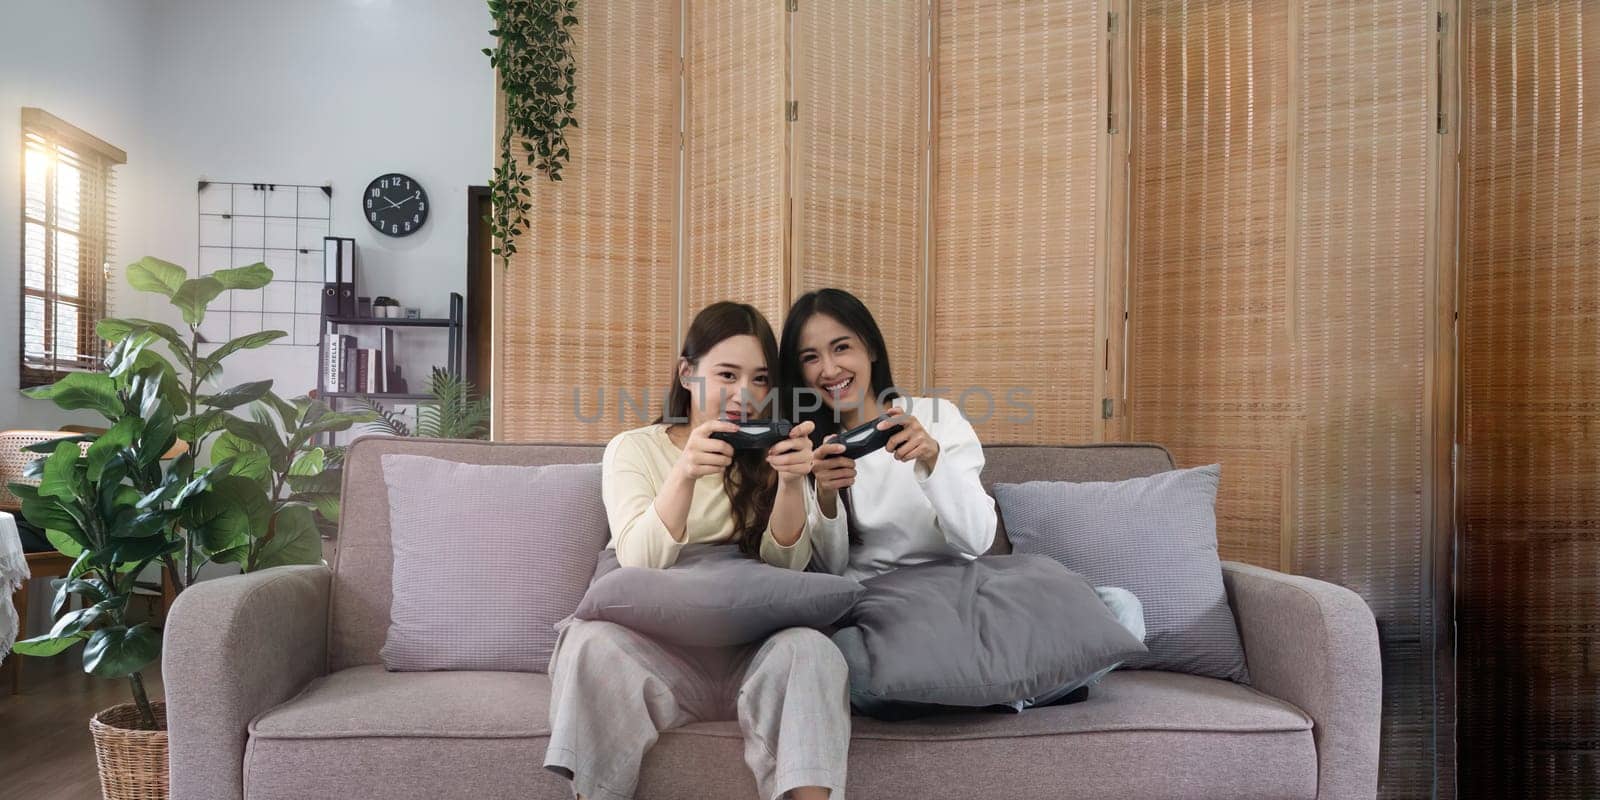 Asian homosexual couple of lesbian woman sitting on couch in living room at home enjoy and excited holding console playing game together.